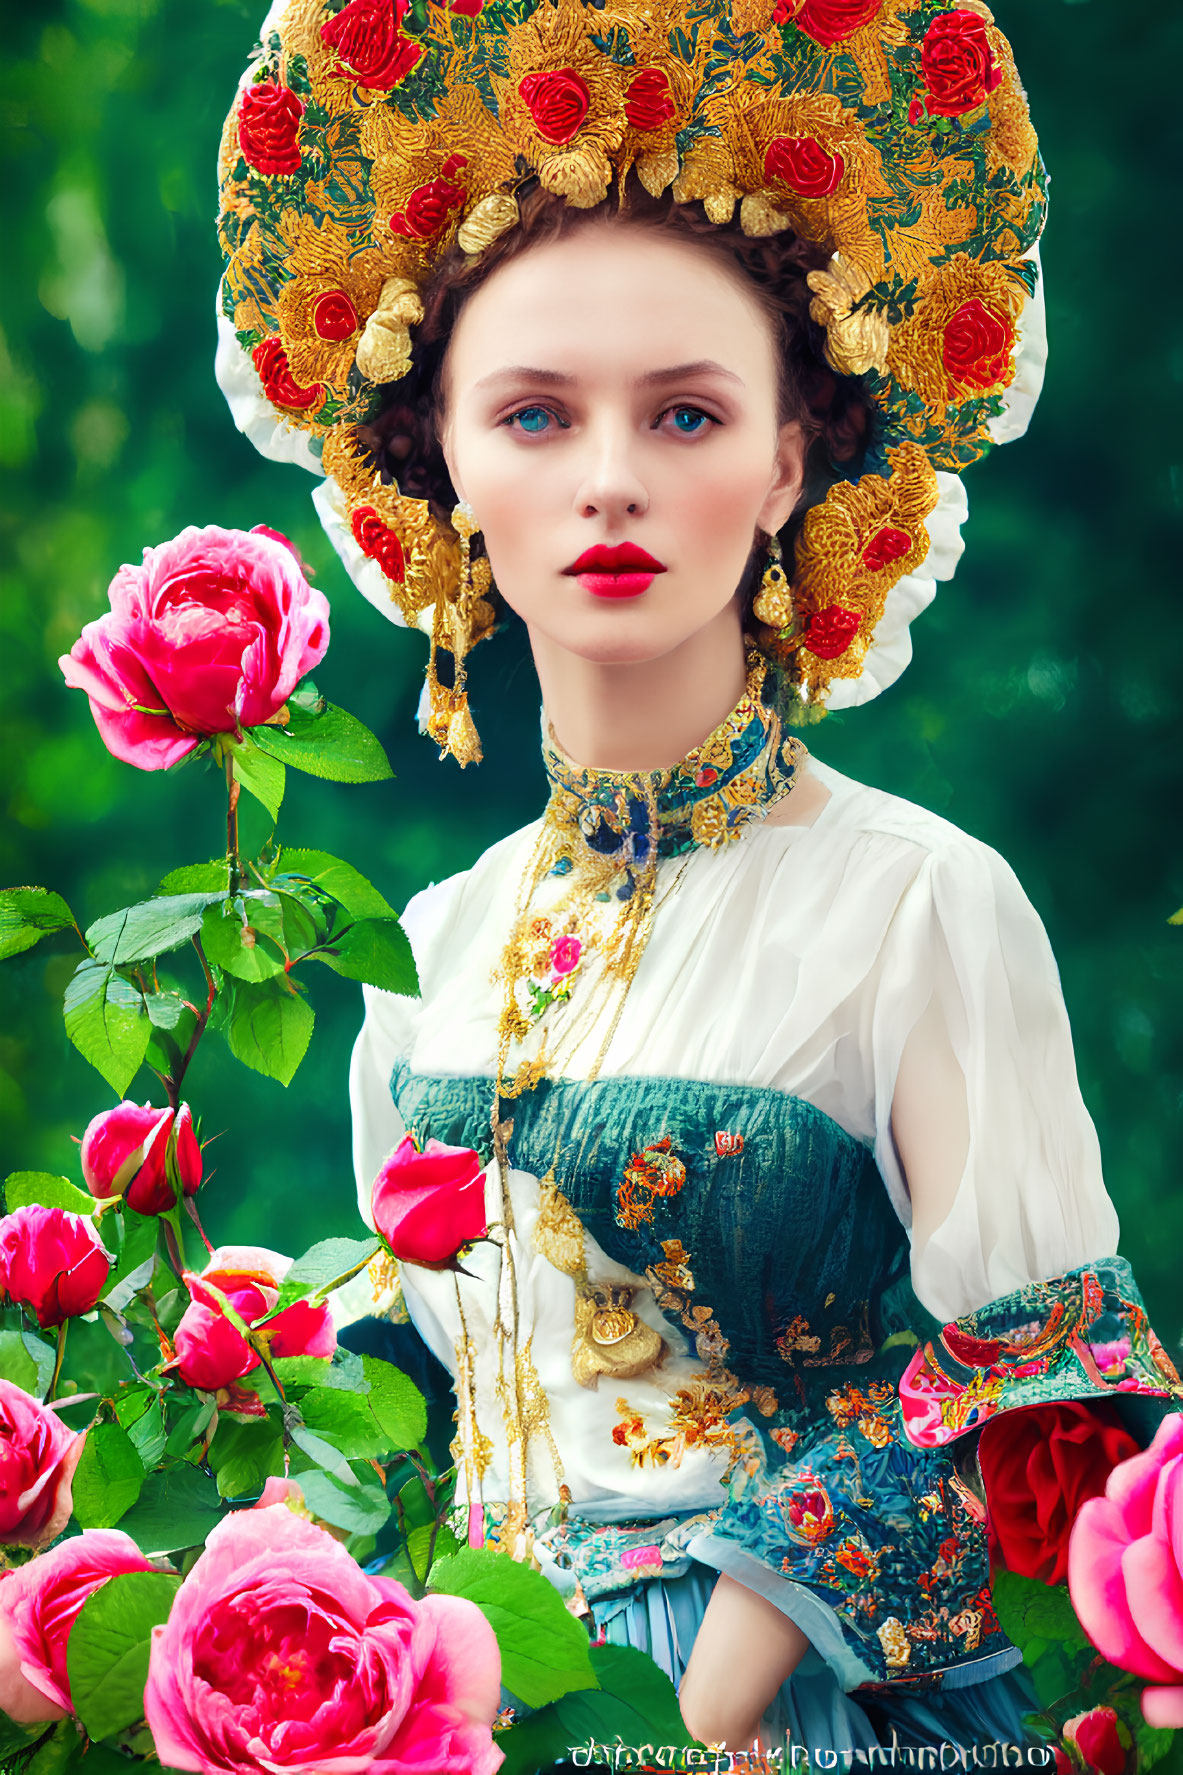 Woman in traditional attire with floral headpiece amidst blooming roses